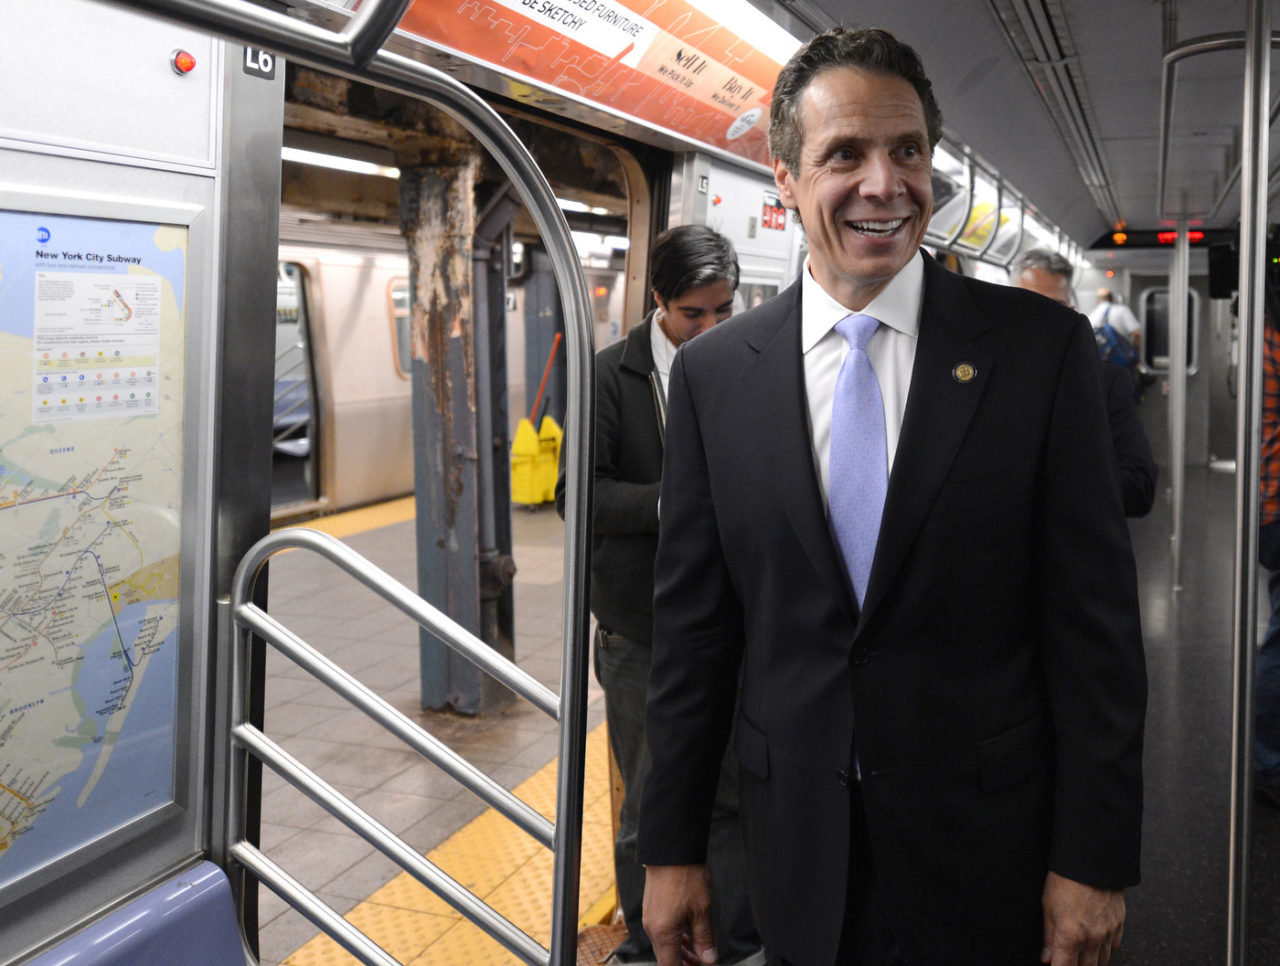 A photo of former New York State Governor Andrew Cuomo riding the E train in New York City.